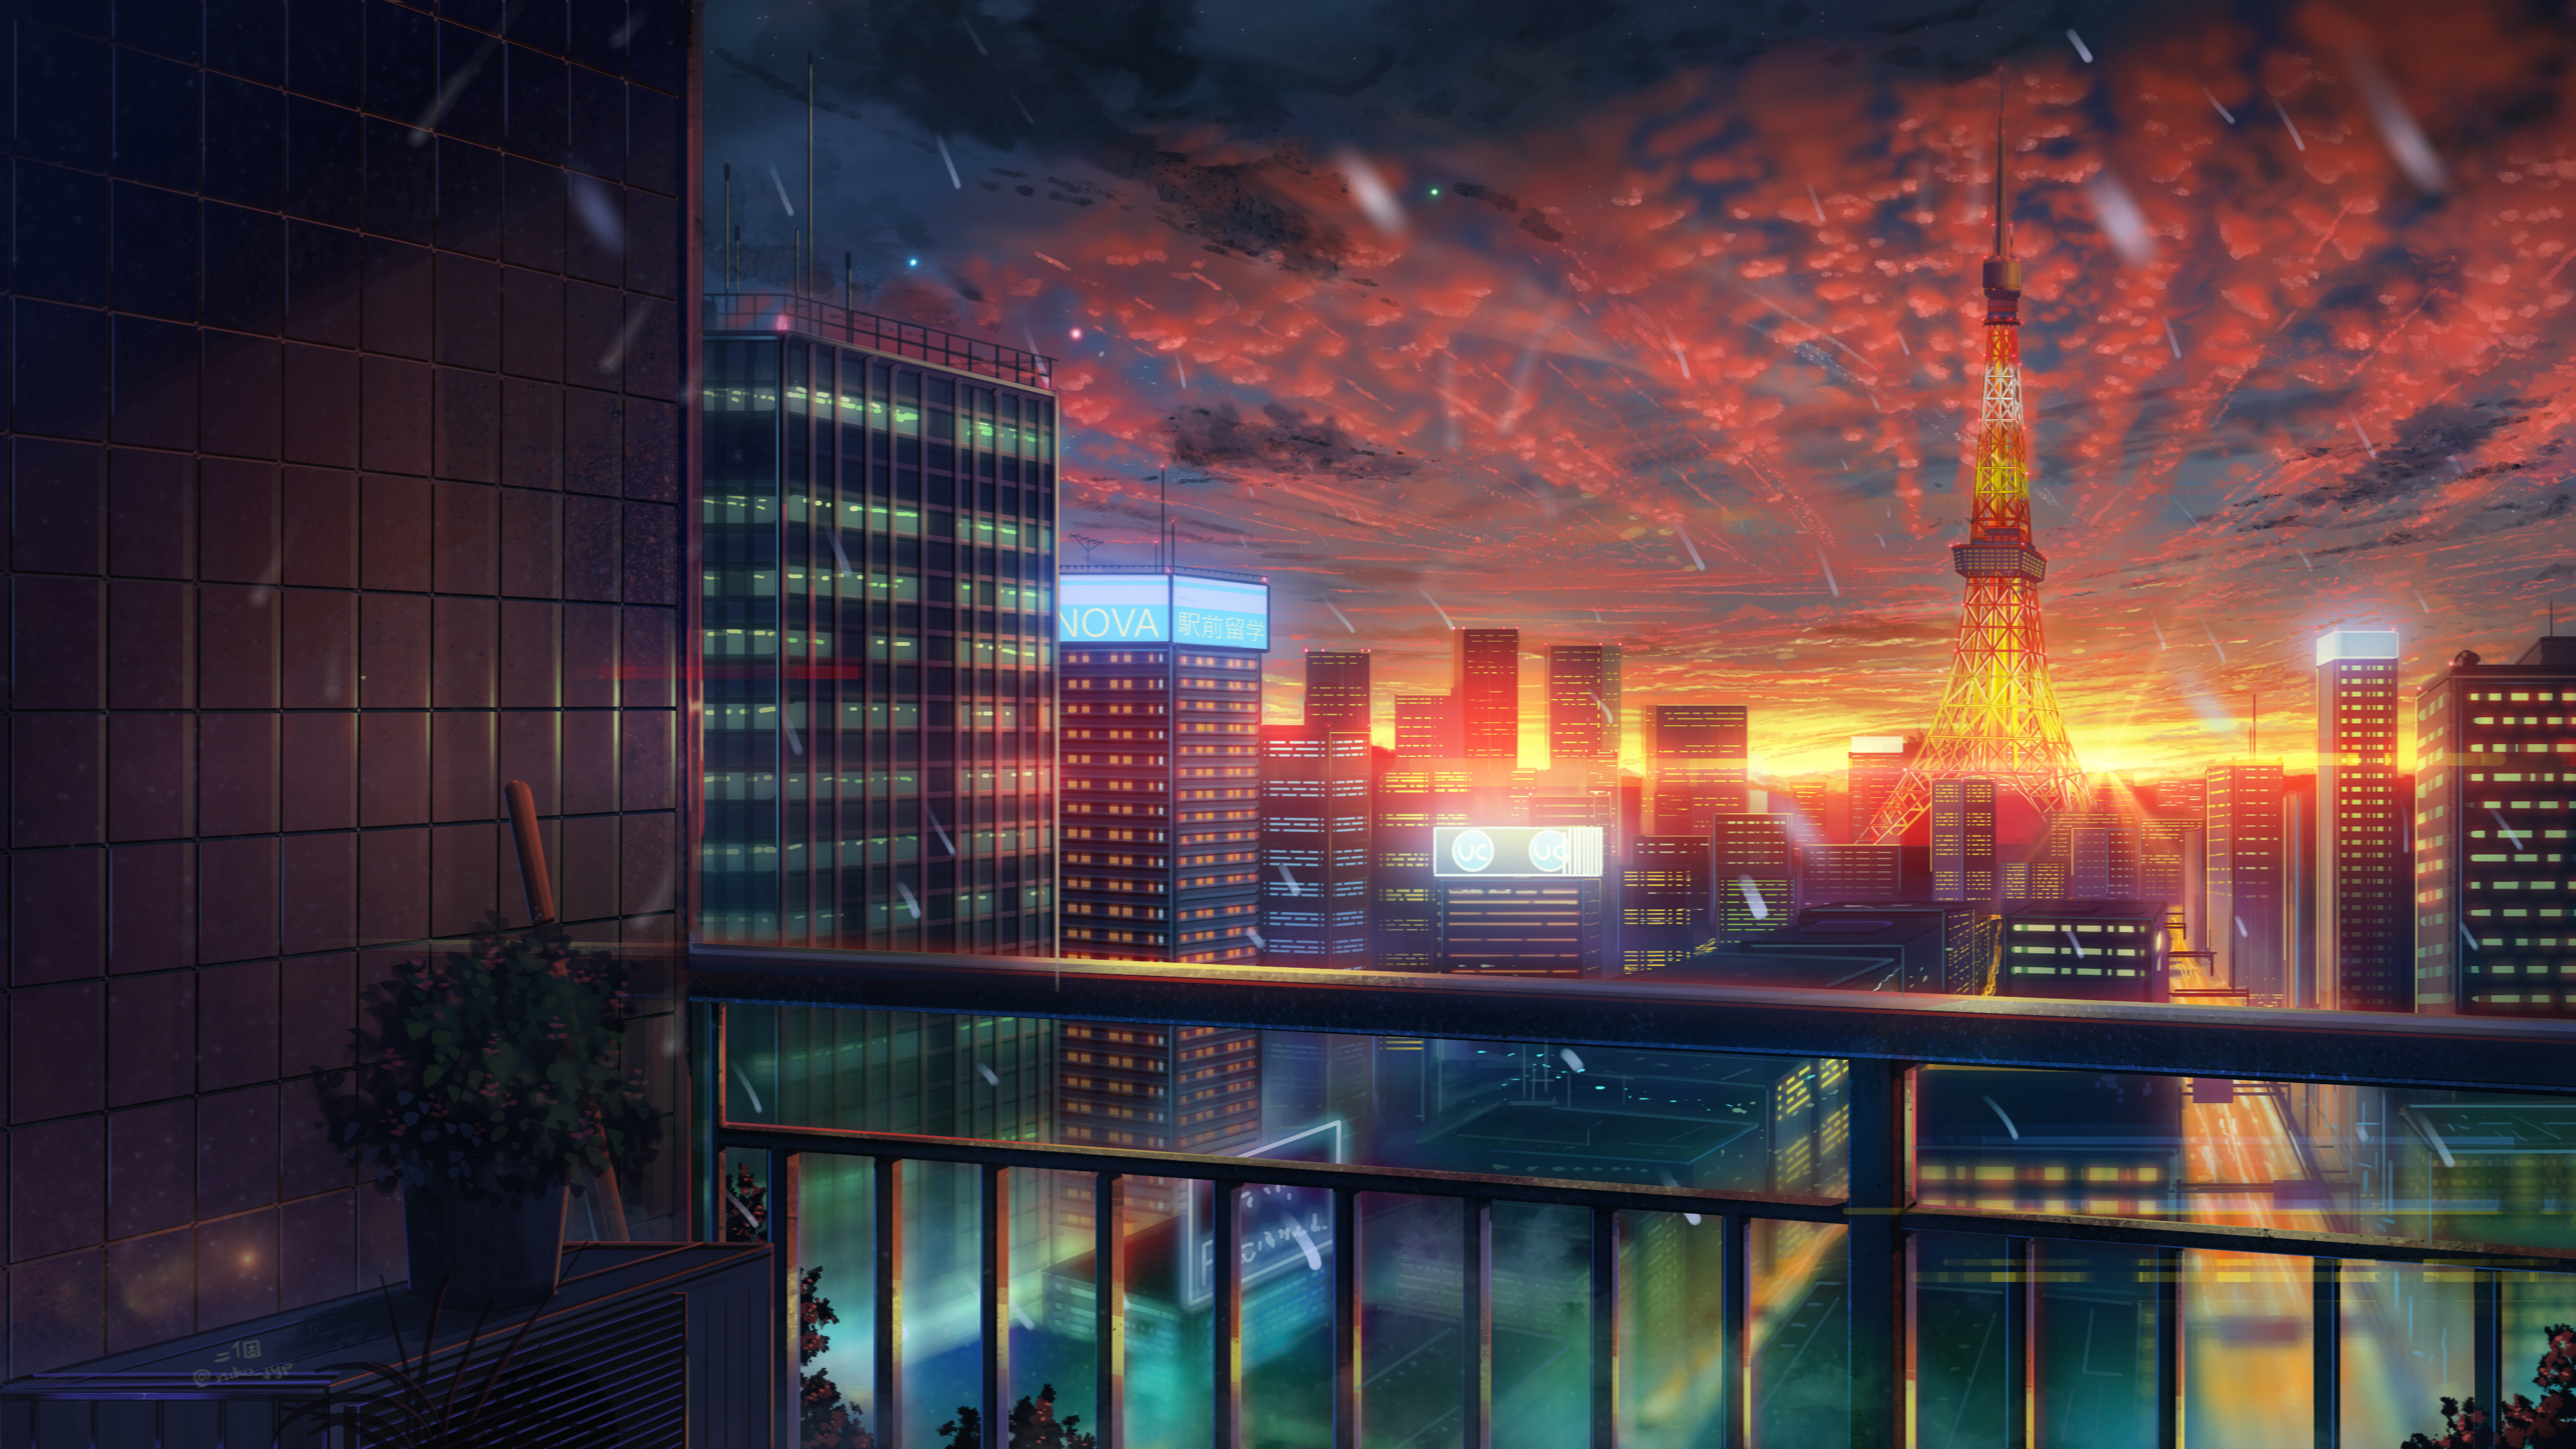 260+ Anime City HD Wallpapers and Backgrounds